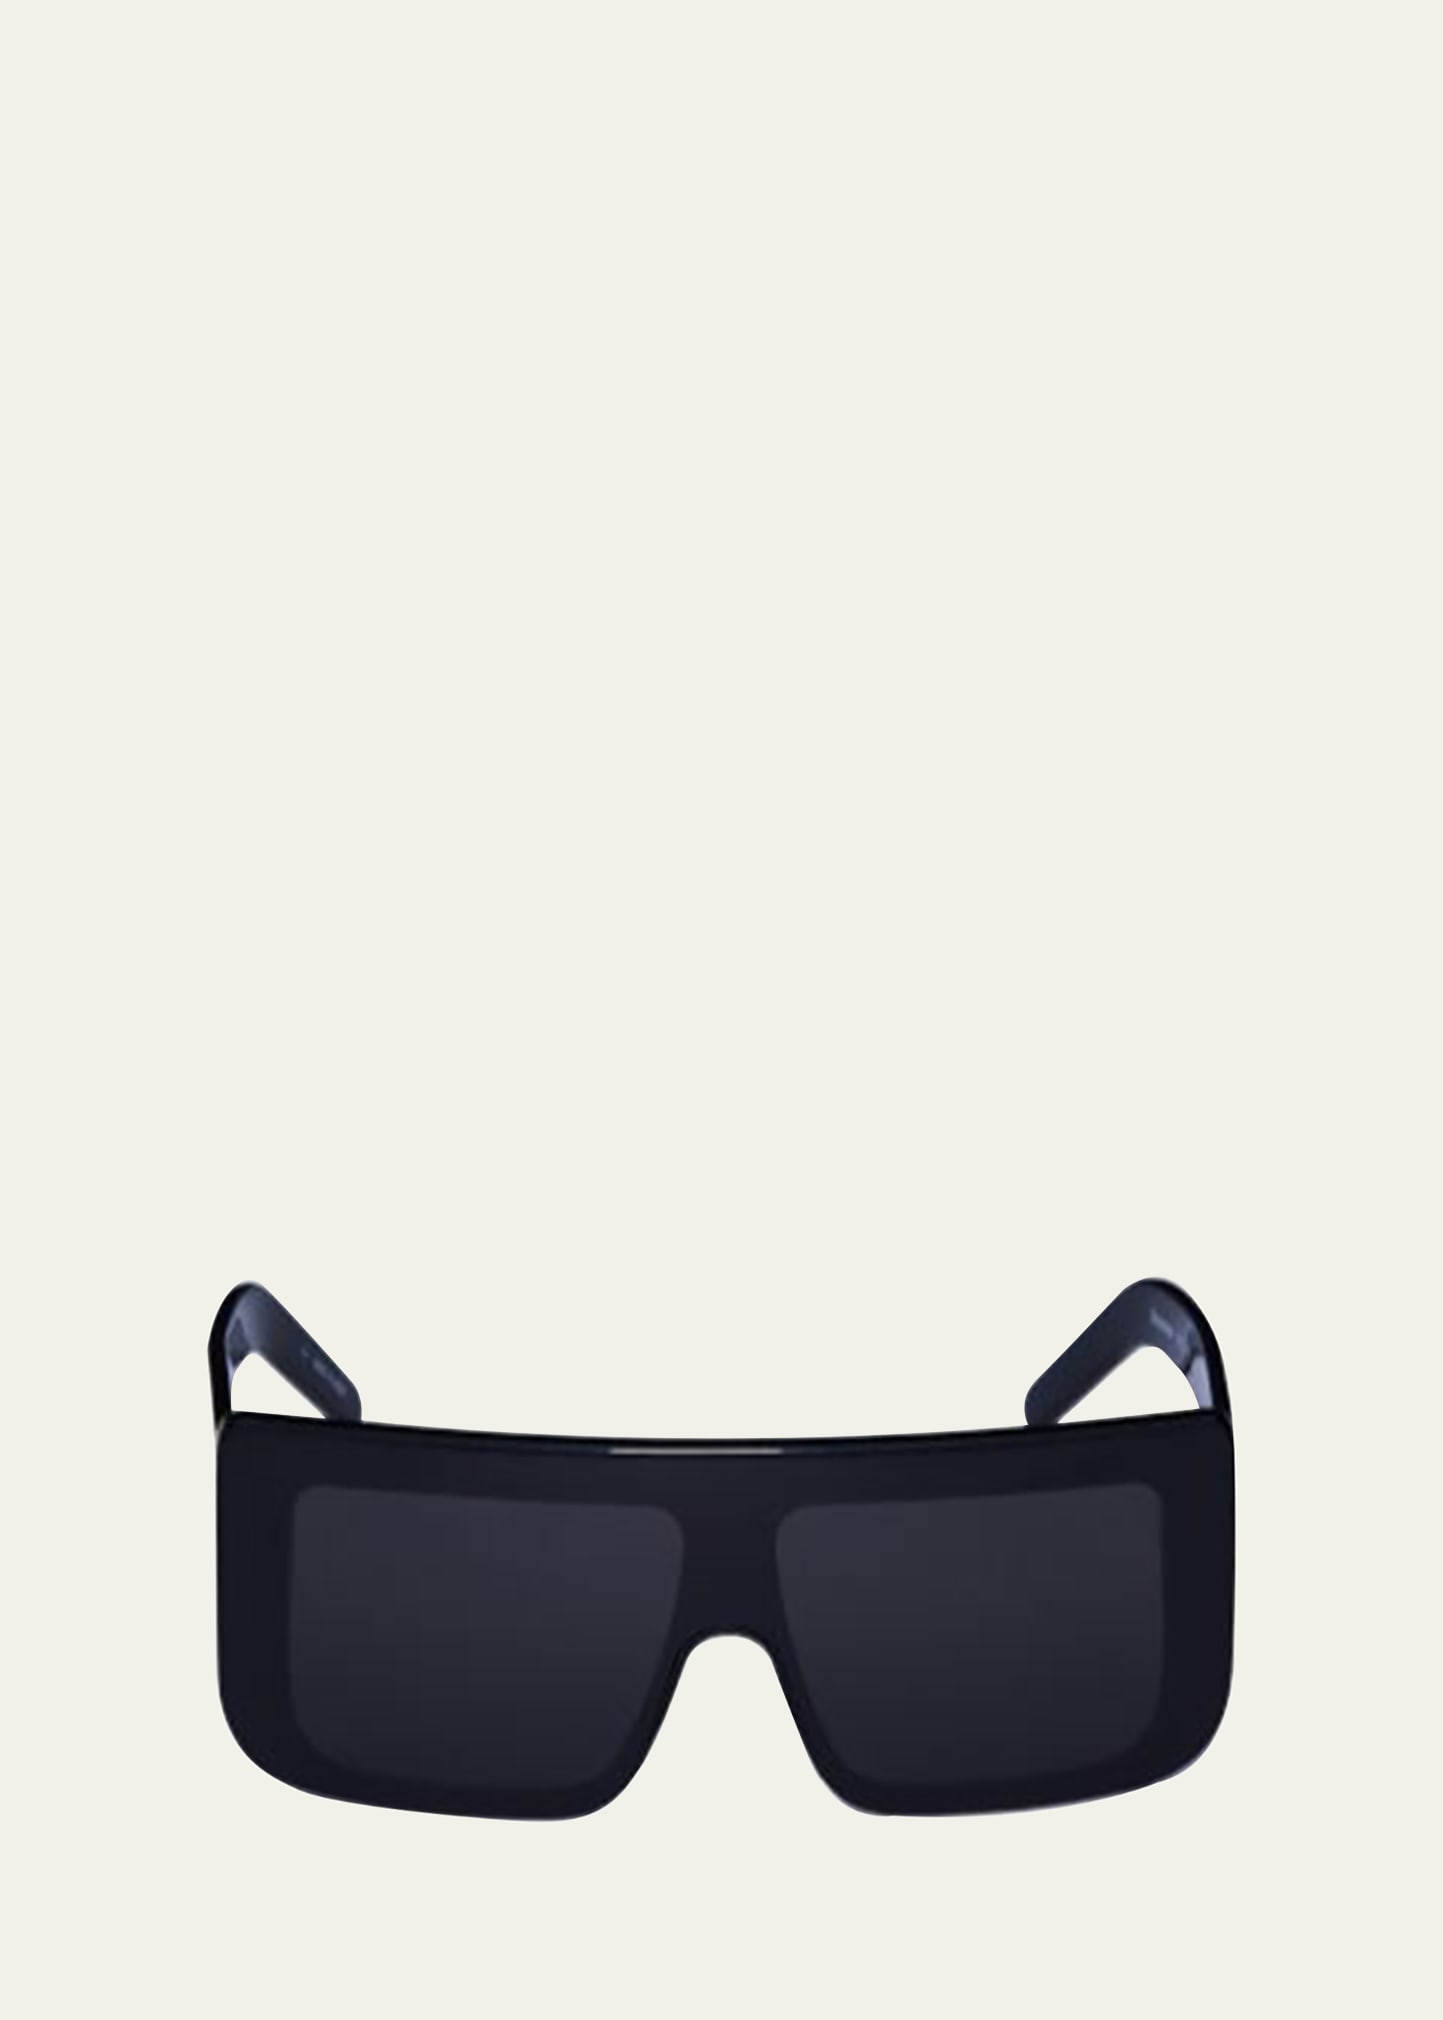 Rick Owens Men's Thick Flat-top Square Sunglasses In Blktemple/blklens